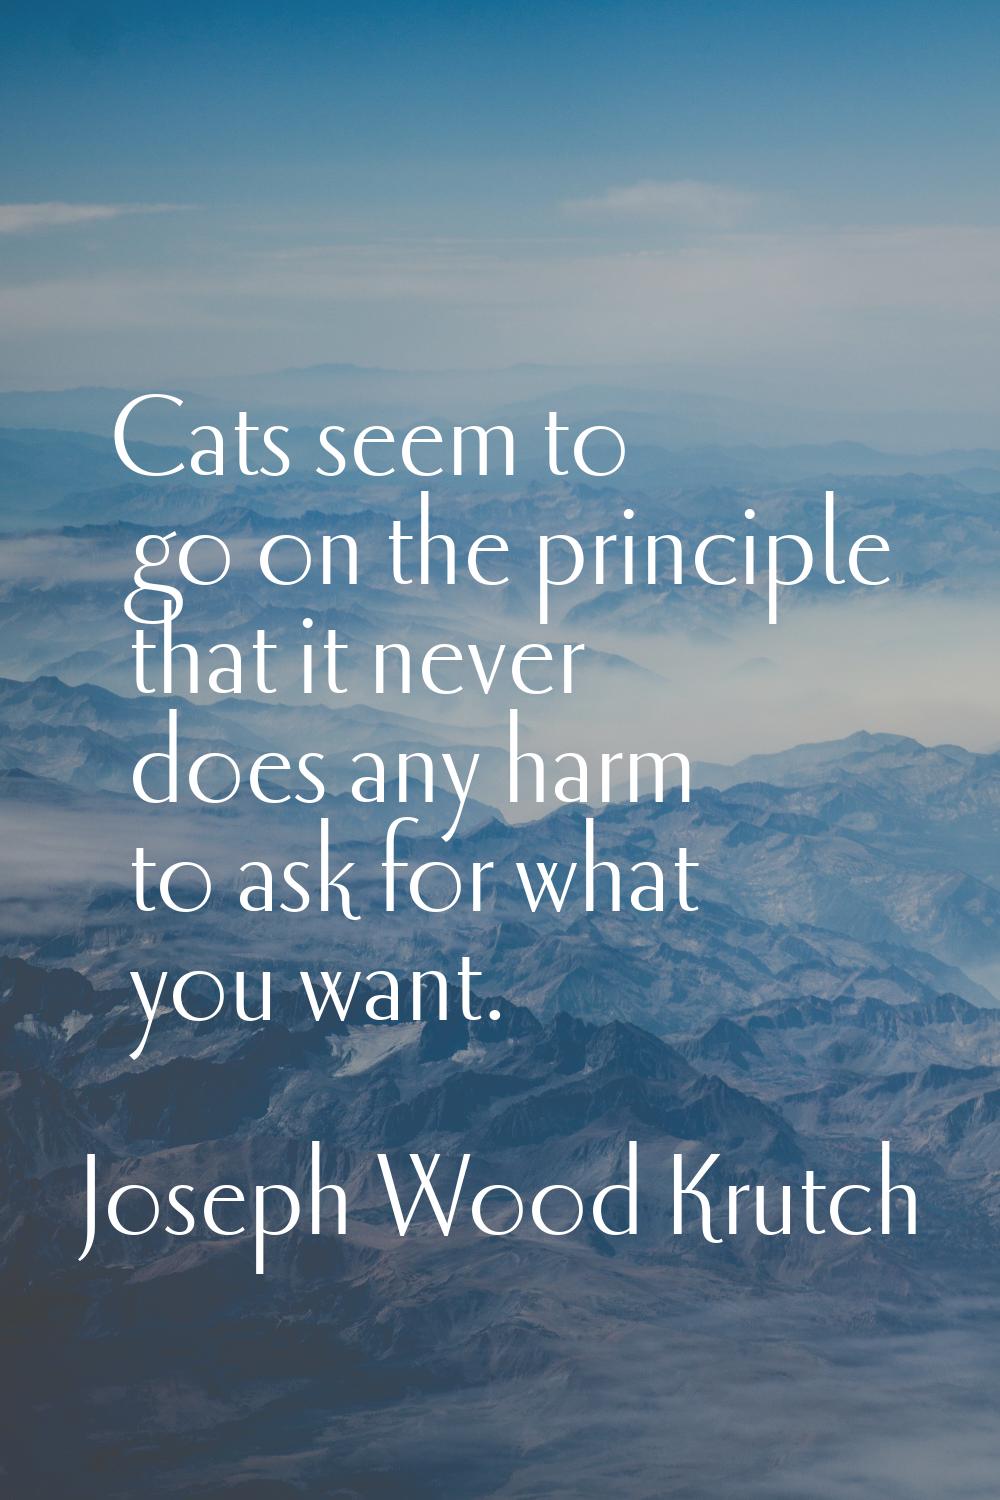 Cats seem to go on the principle that it never does any harm to ask for what you want.